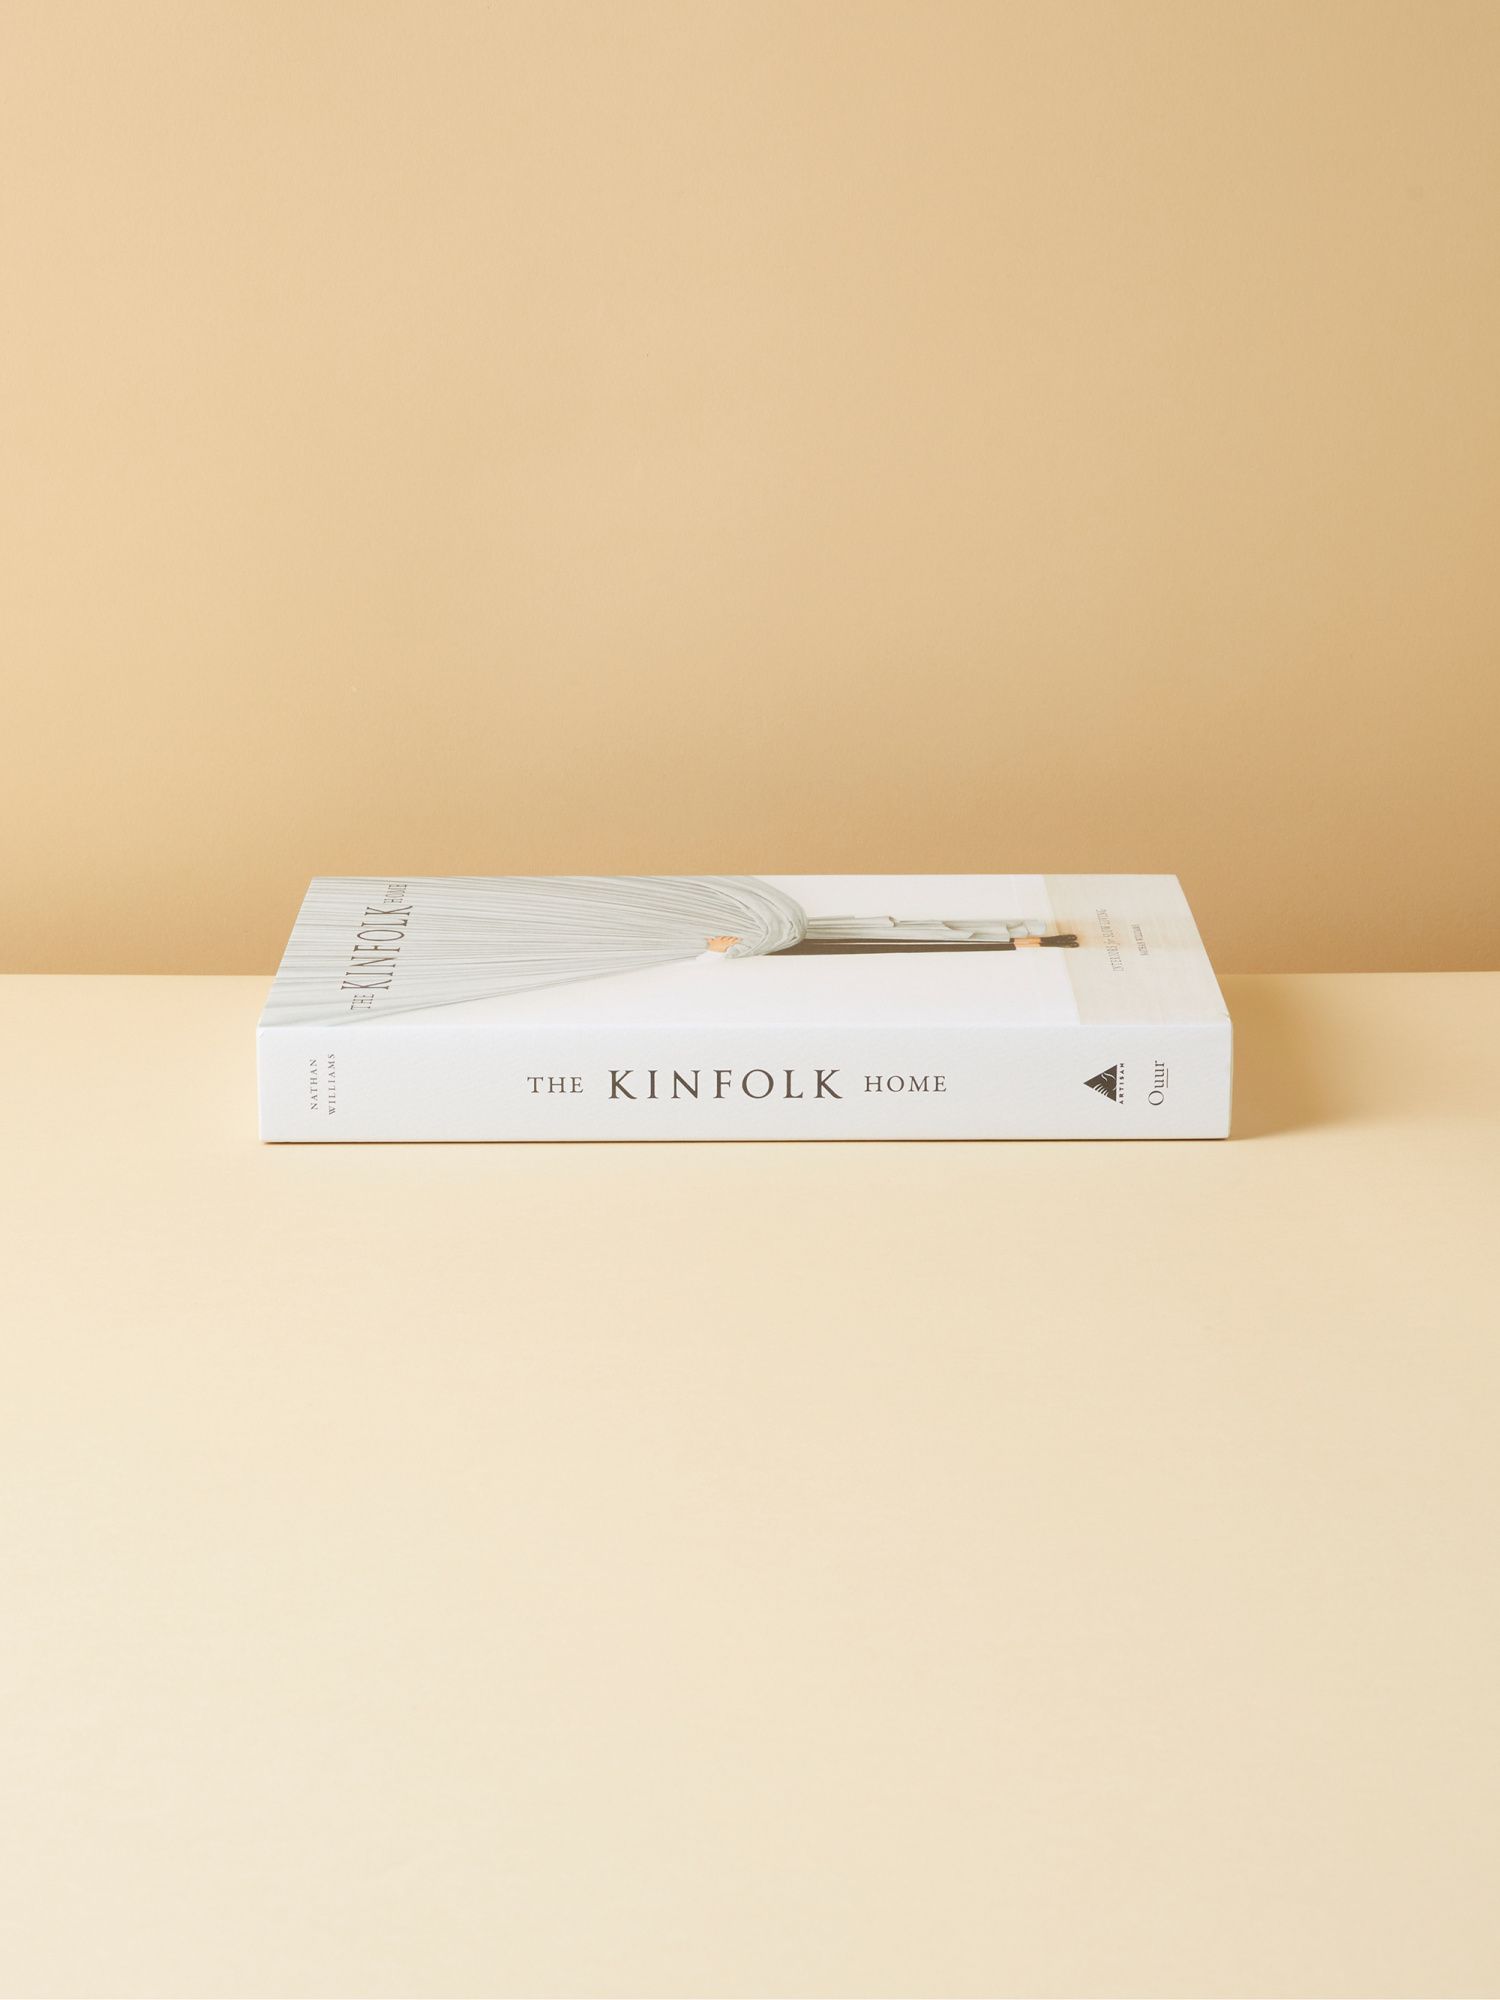 Kinfolk Home Coffee Table Book | Gifts For All | HomeGoods | HomeGoods